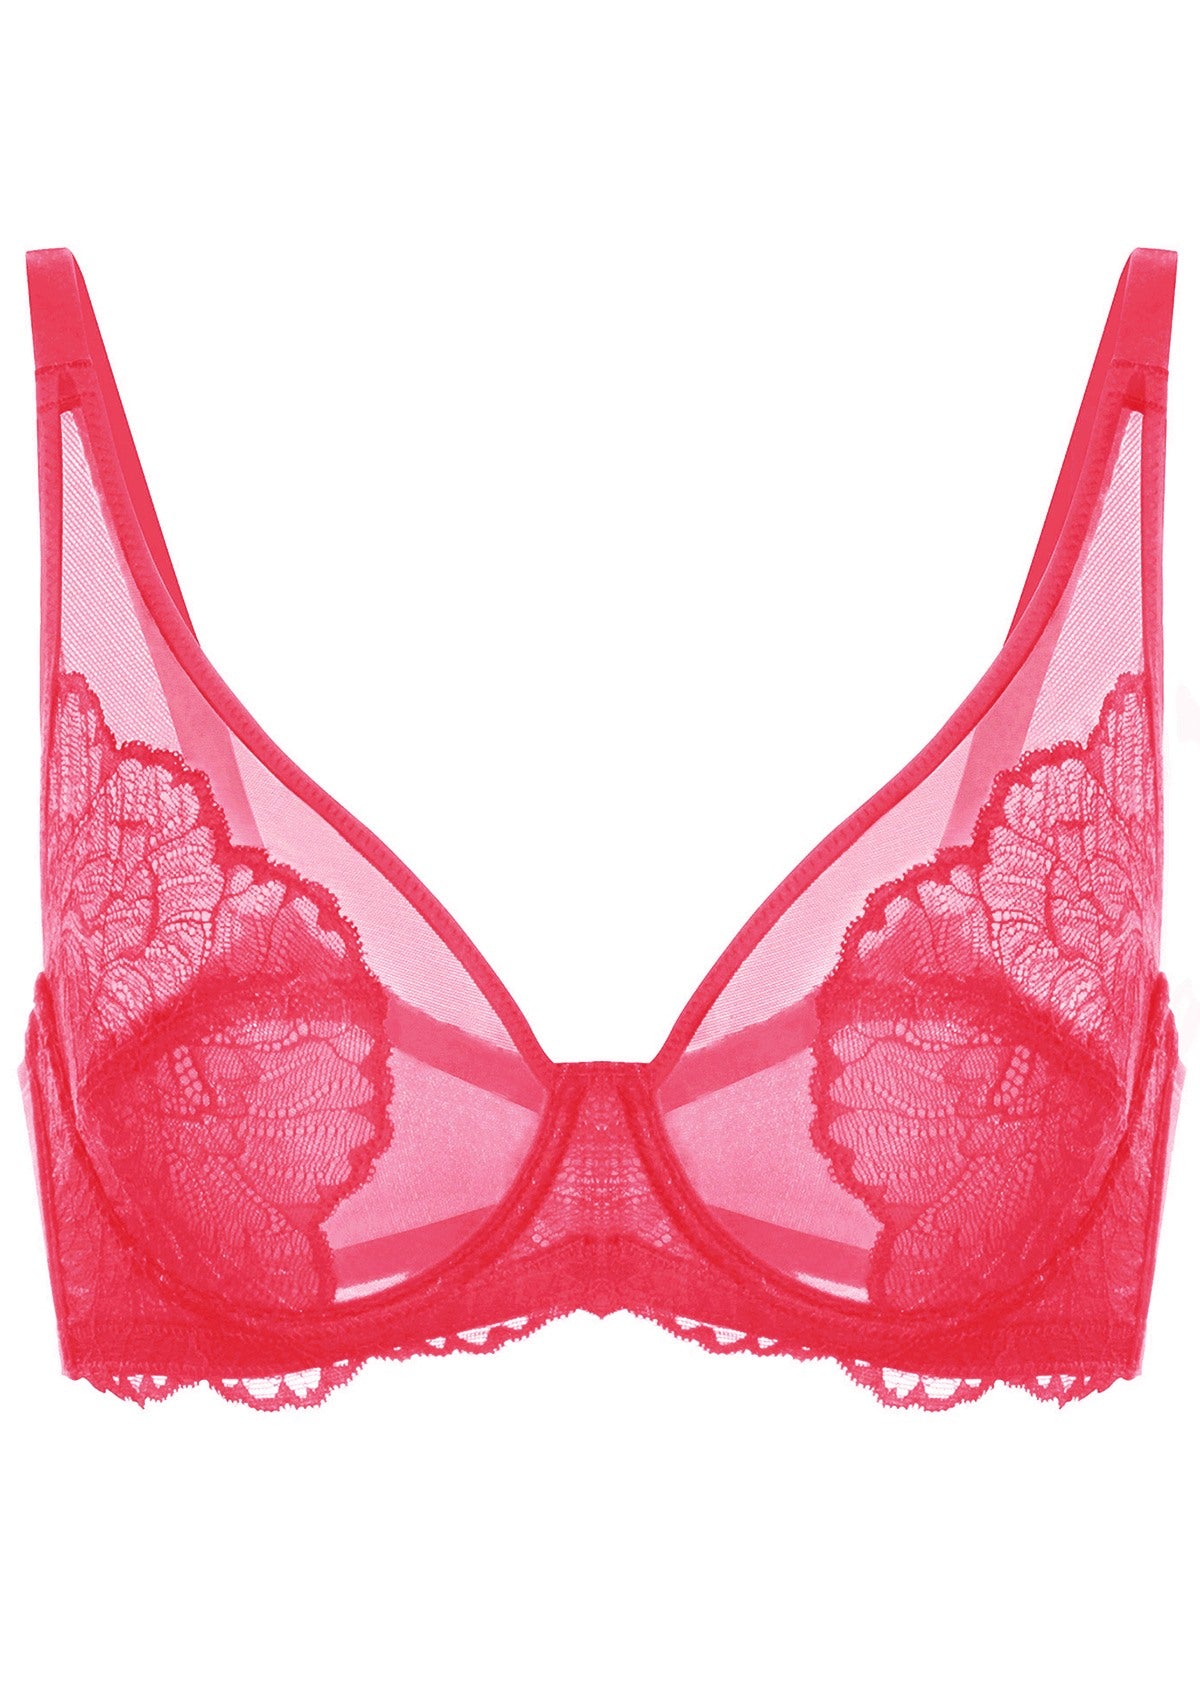 HSIA Blossom Unlined Lace Underwire Bra - Light Coral / 38 / D